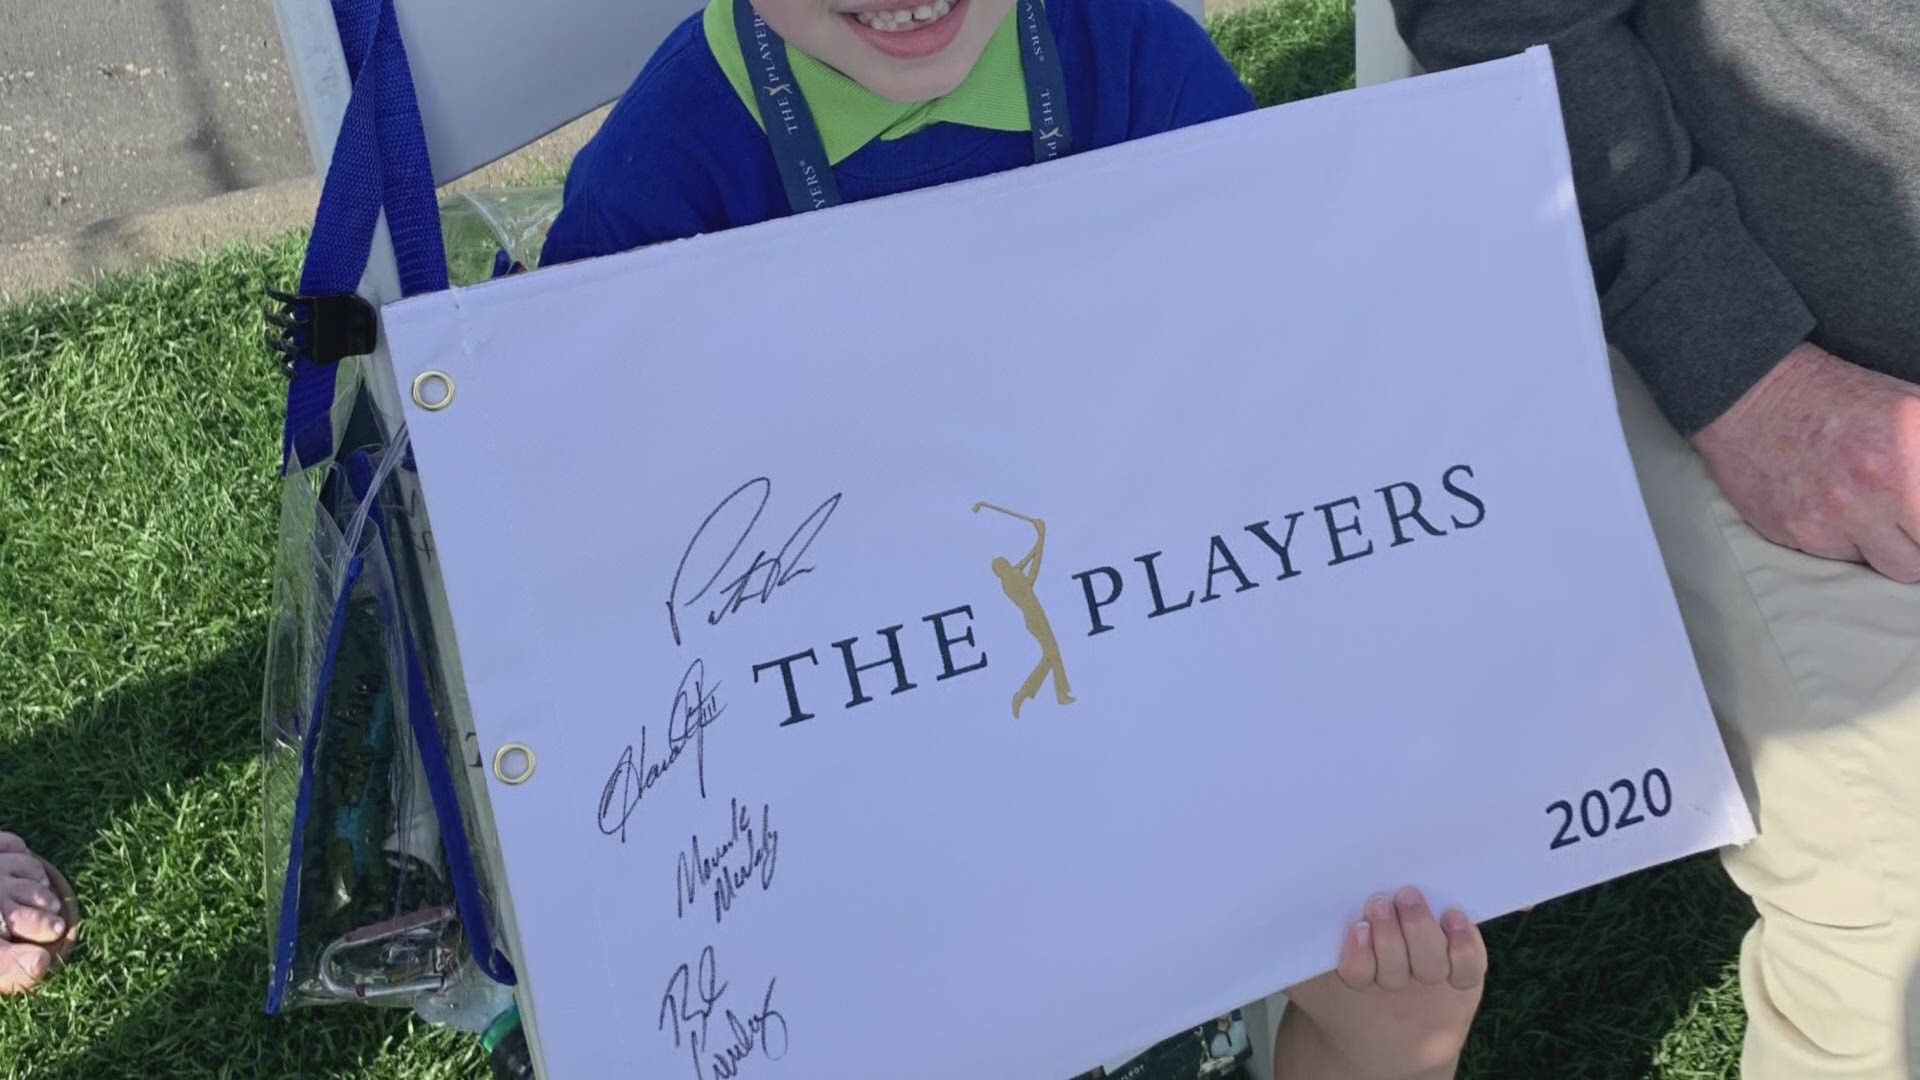 Two childhood cancer survivors were treated to a day at The Players through Dreams Come True.